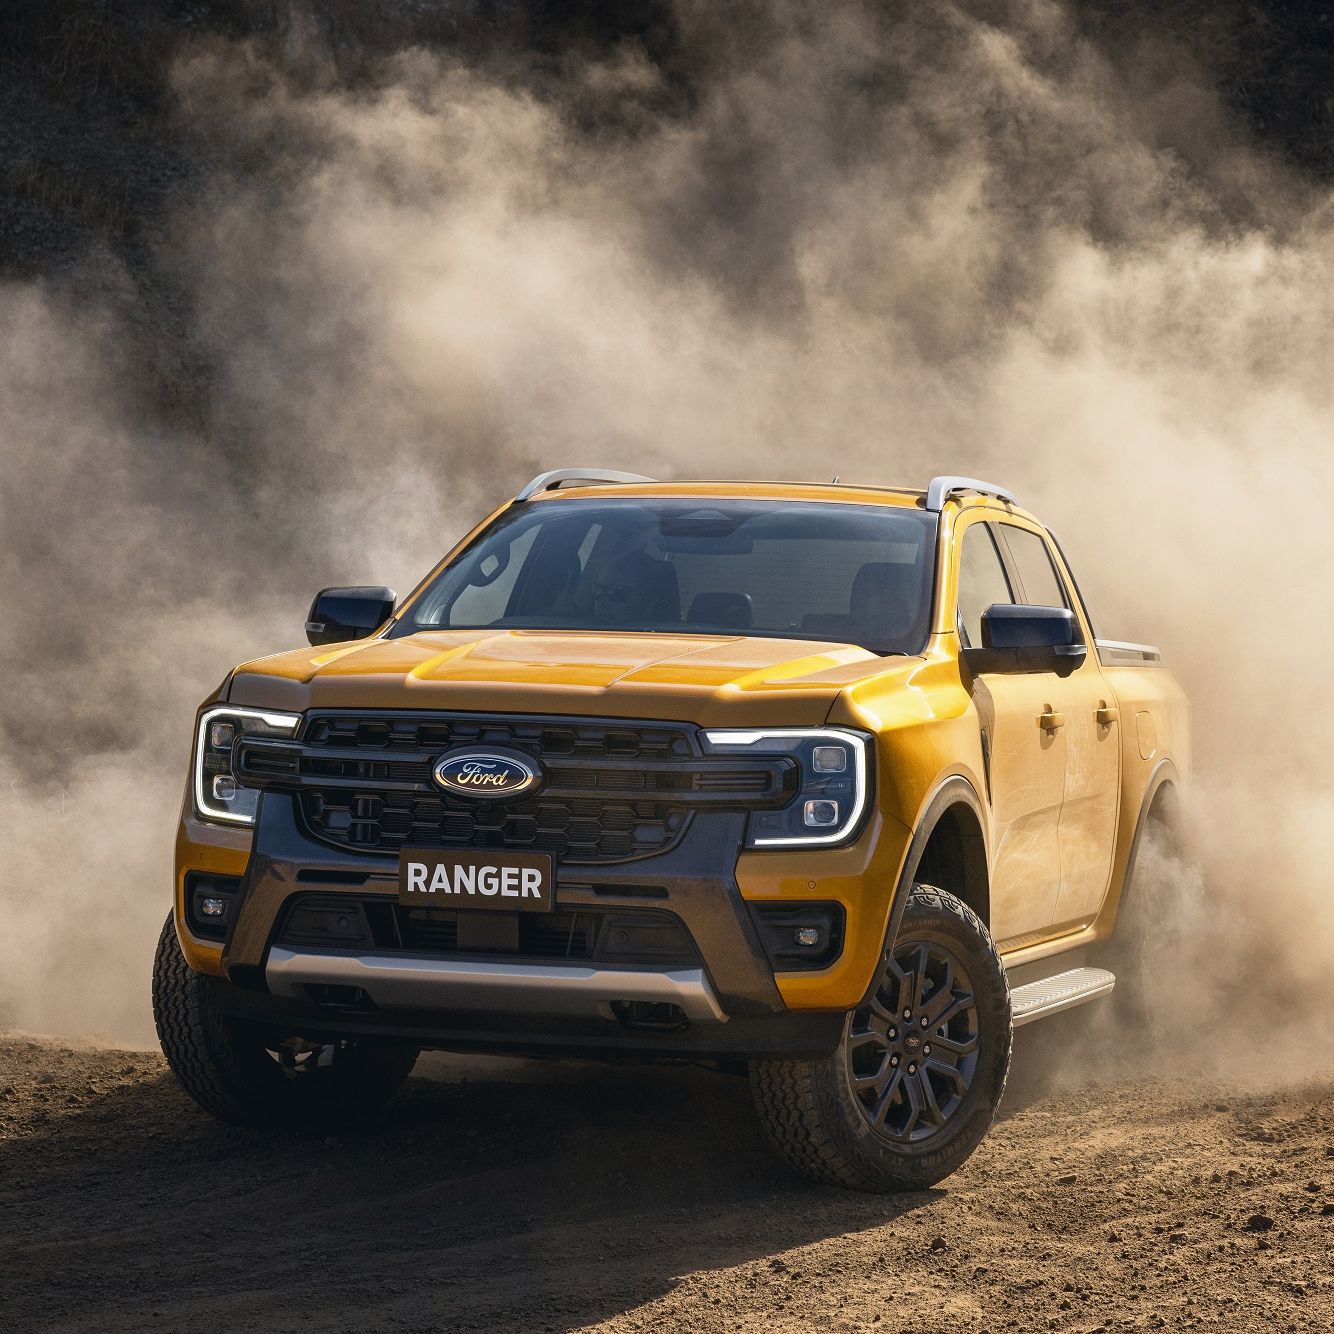 Ford Revealed the New Ranger. Here's a Preview of What to Expect